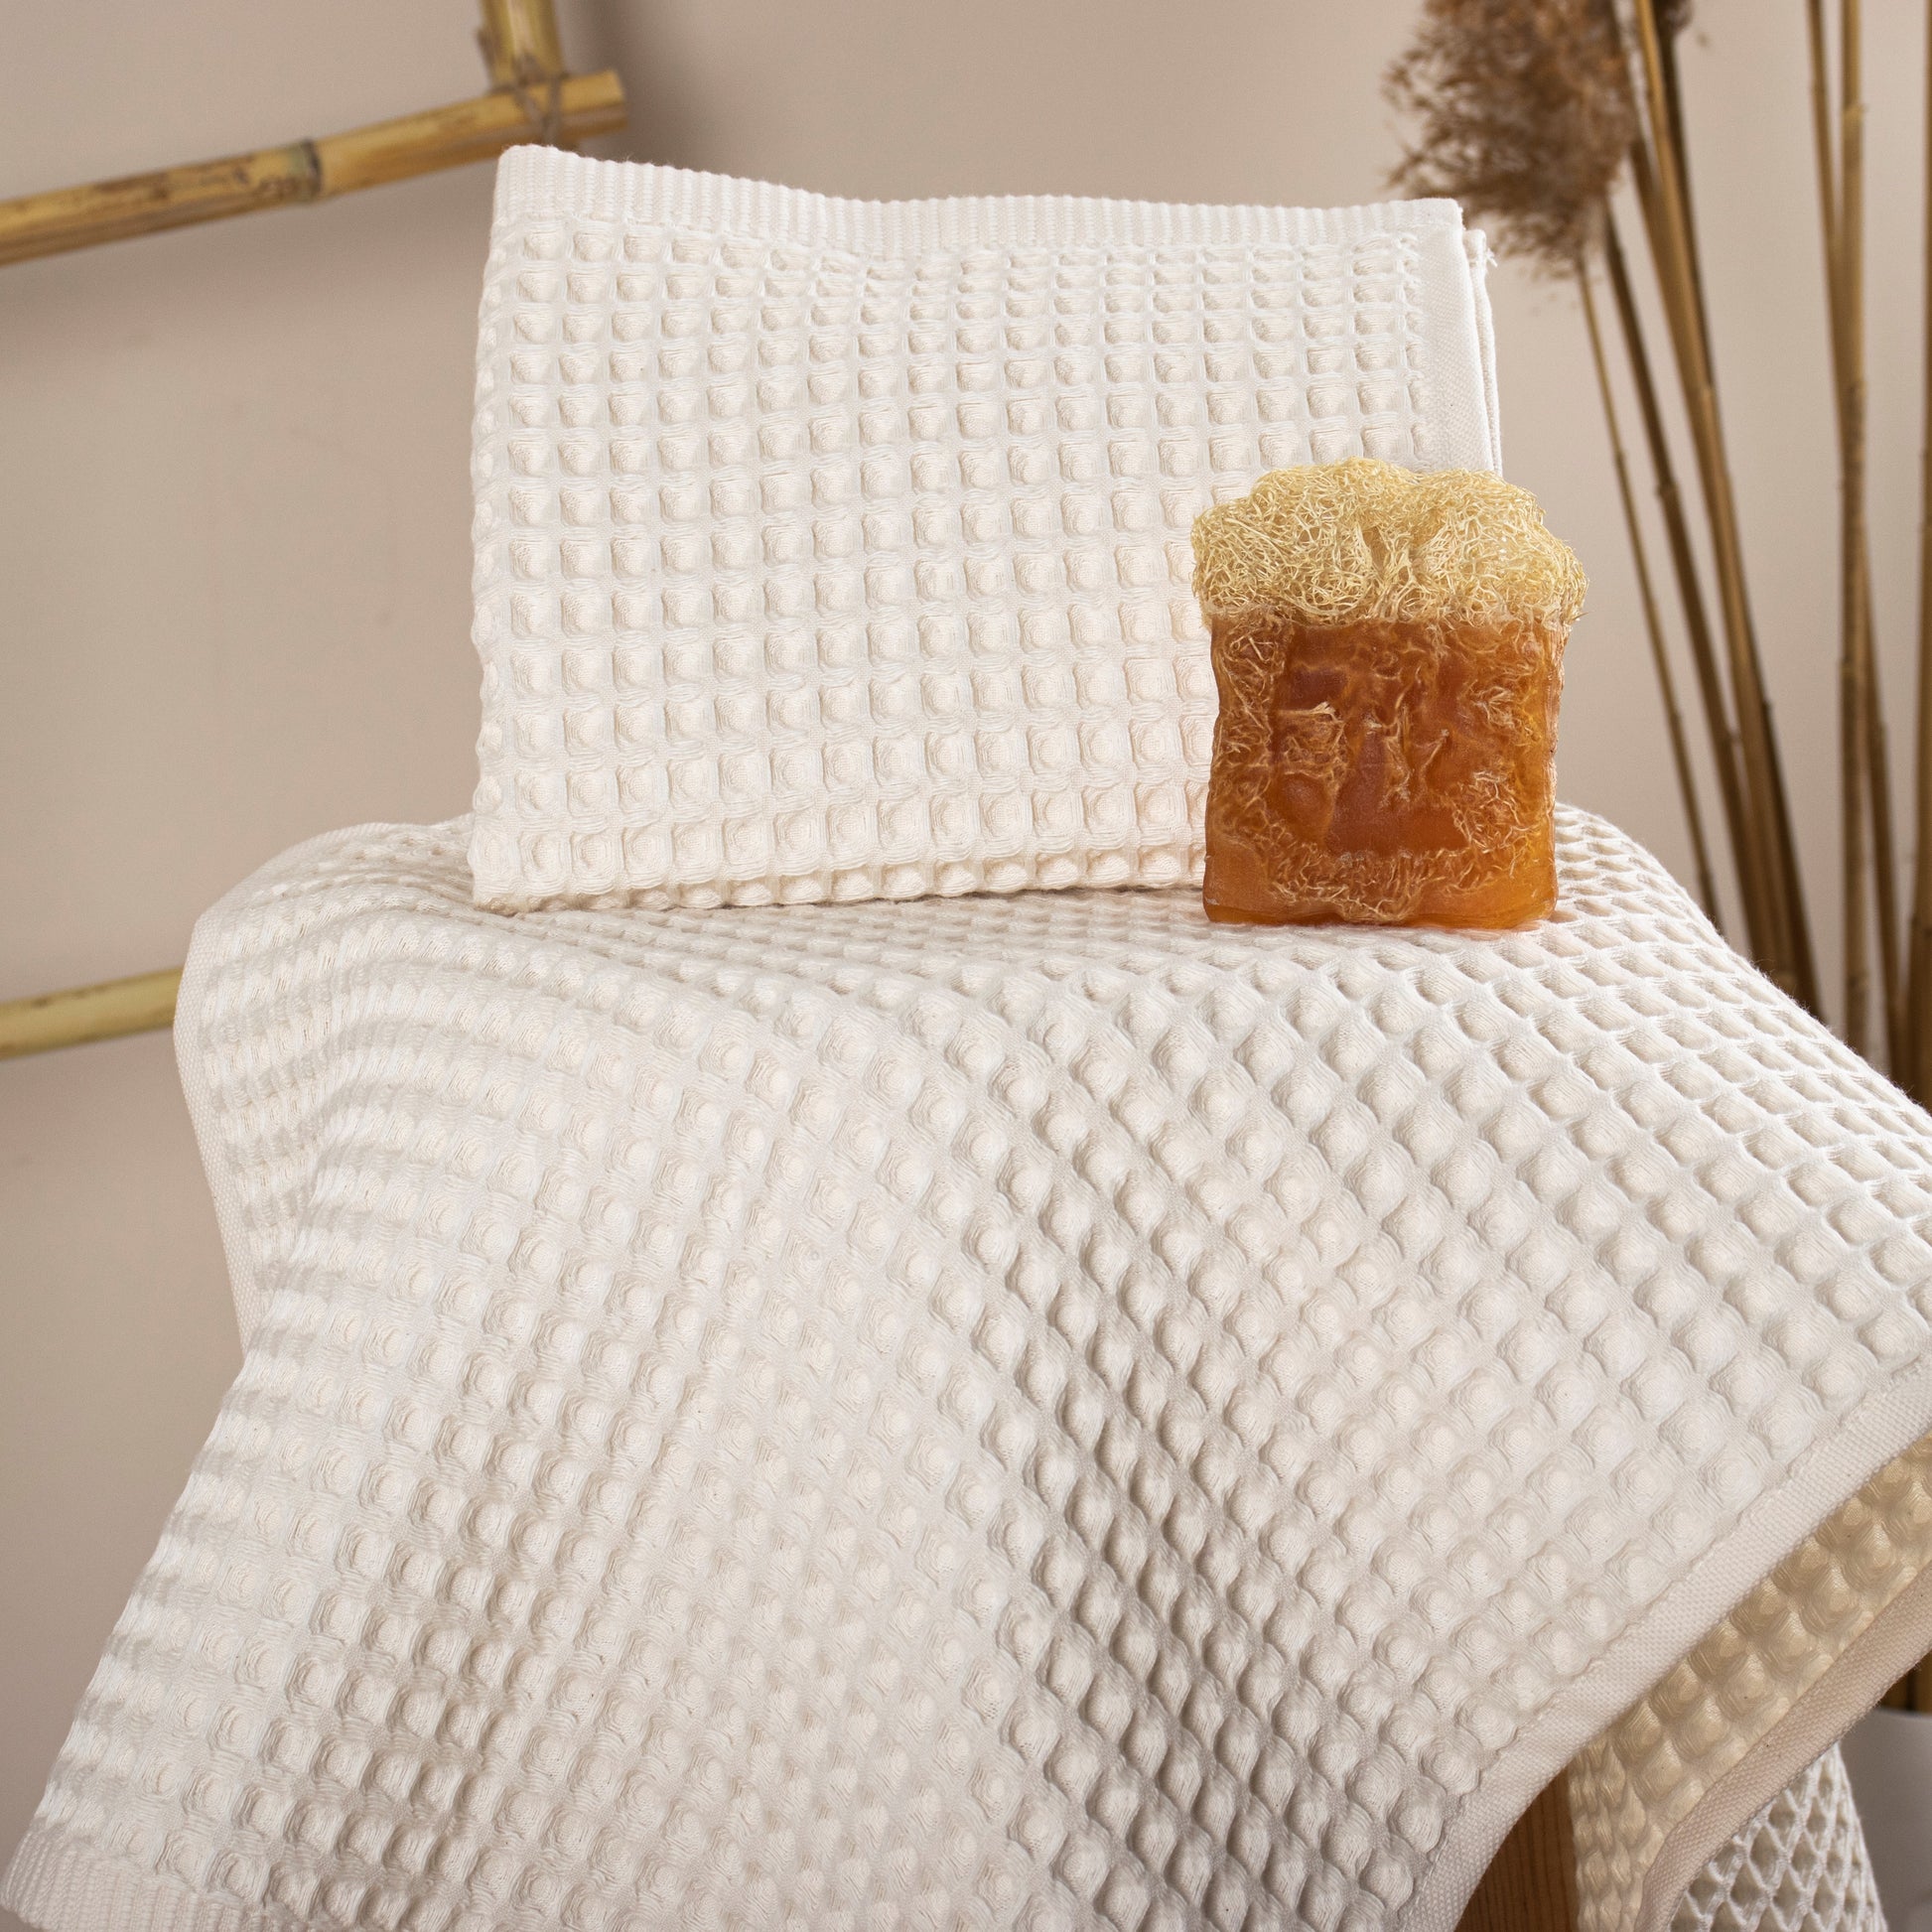 Honeycomb Towel - Waffle Towel - Kitchen and Hand Towel - White Pack of 10 - 10 Pieces